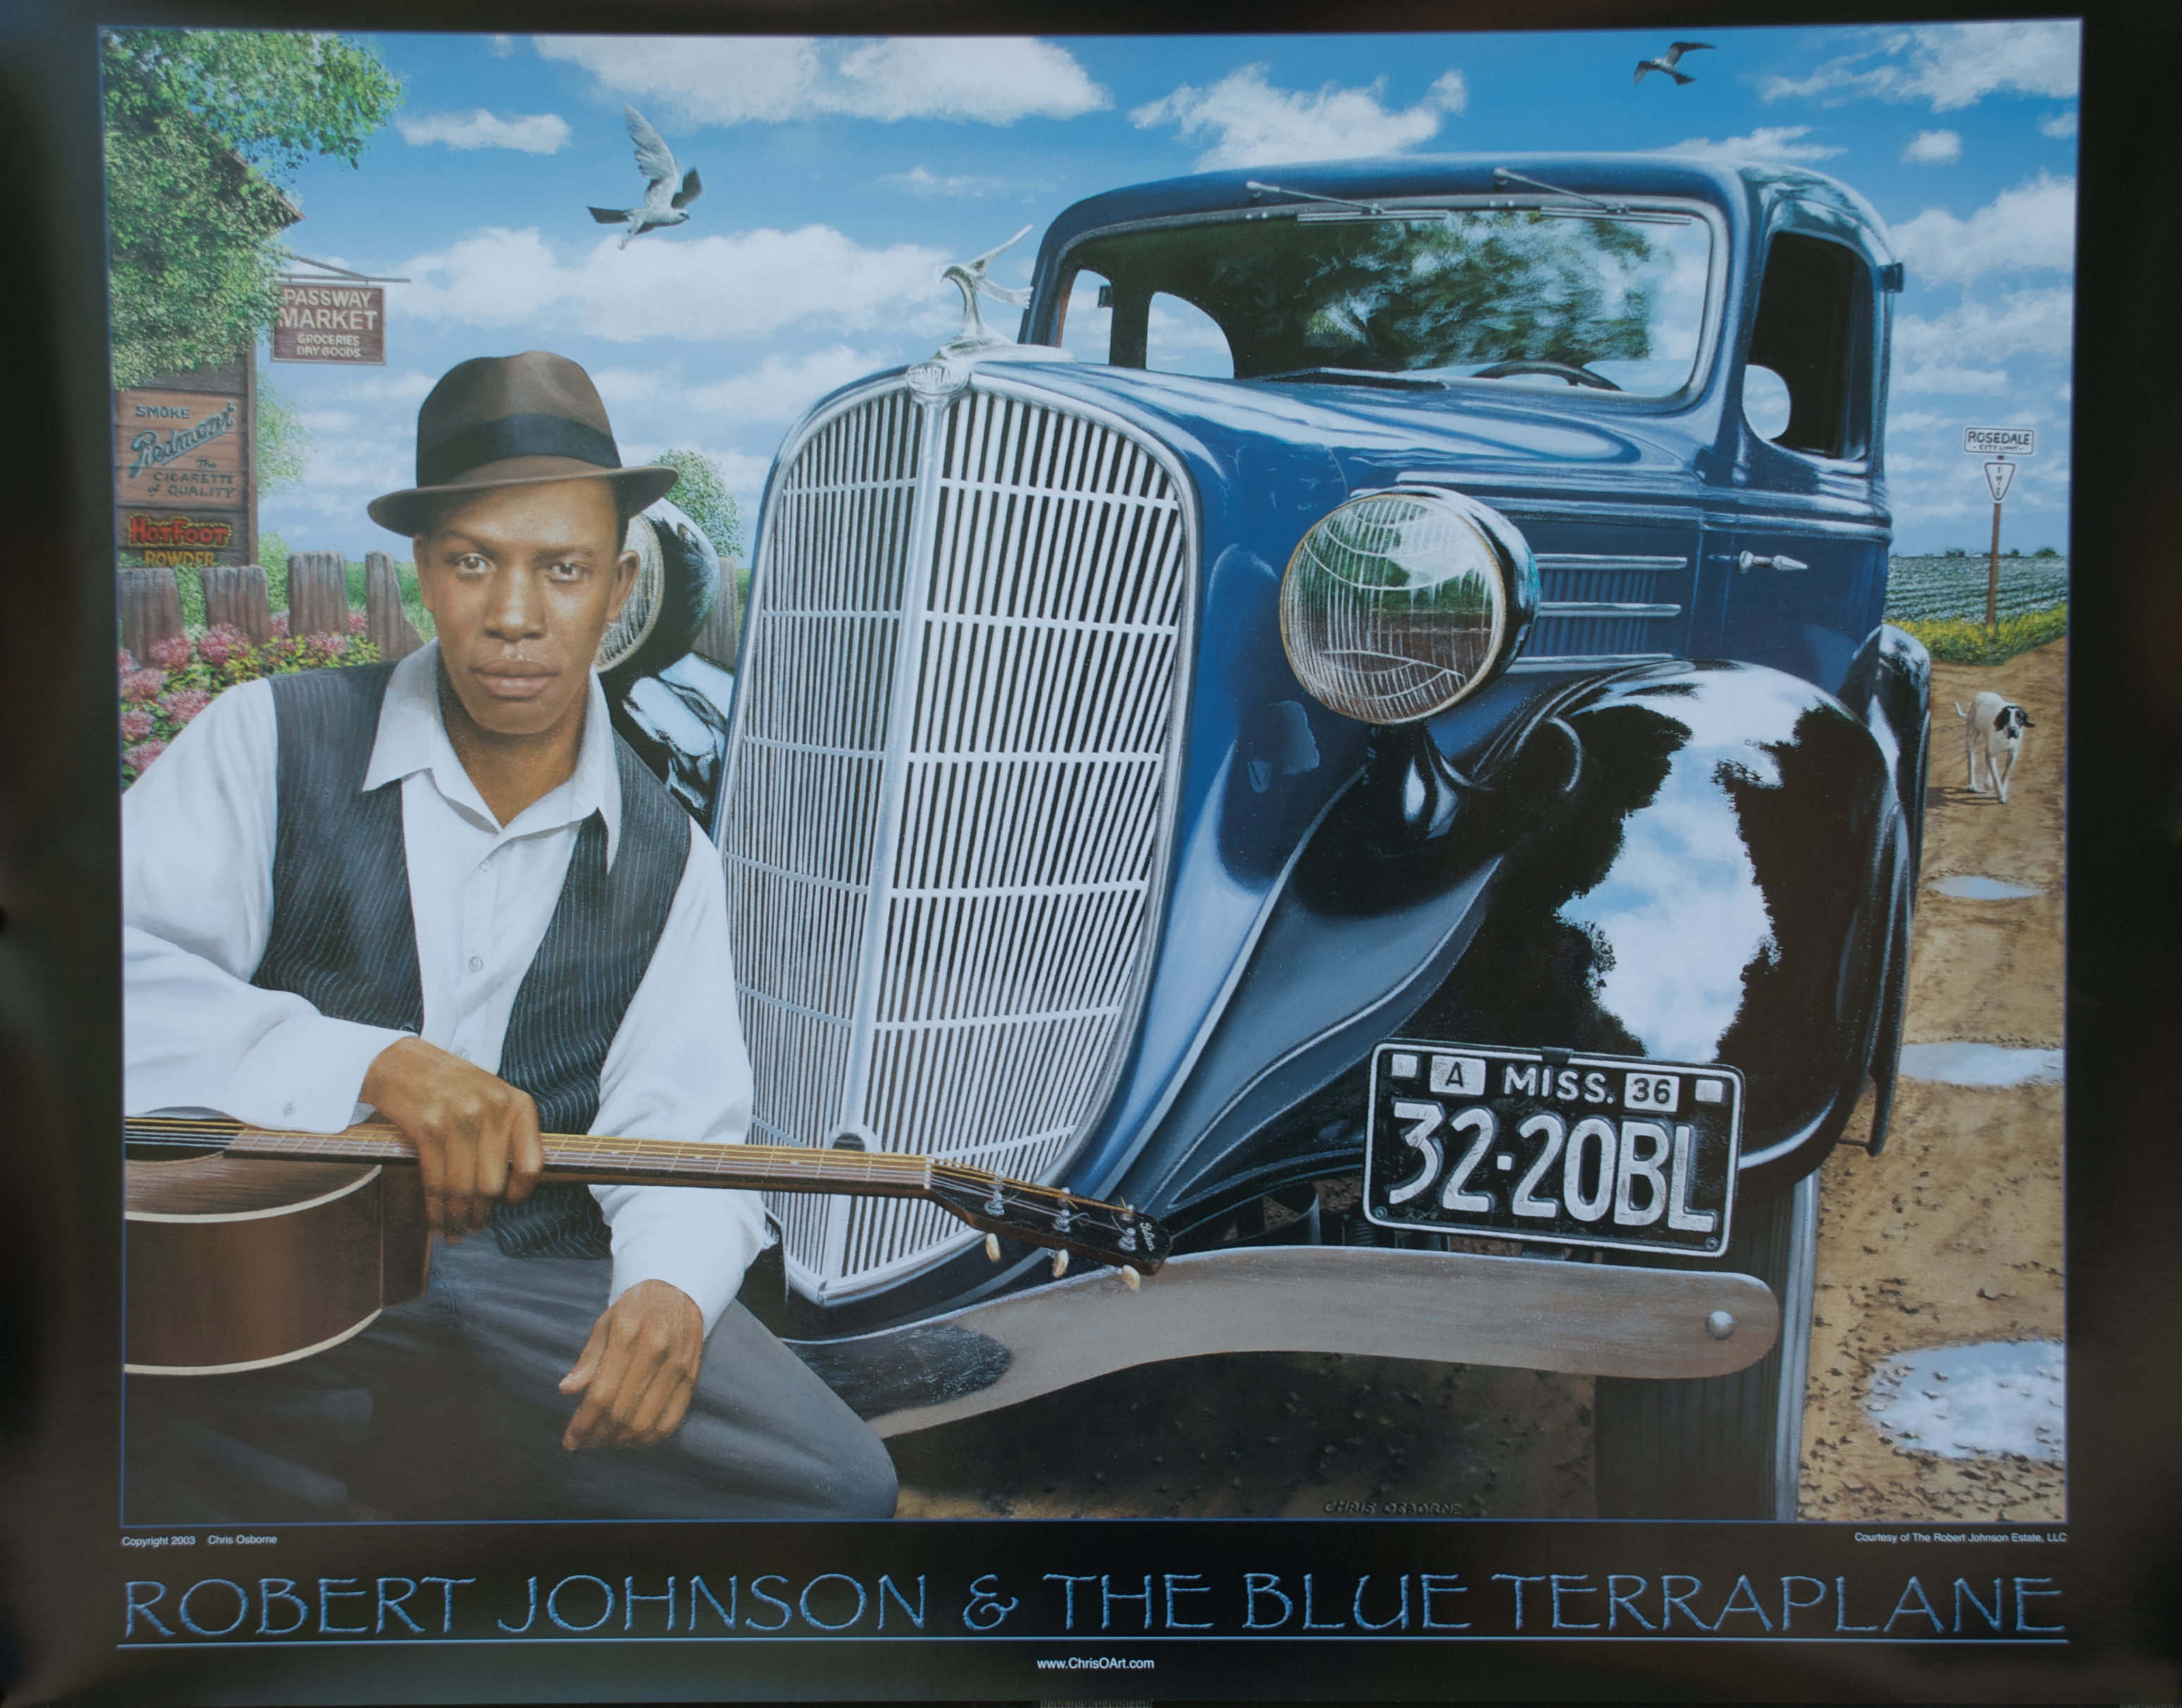 Chris Osborne's Robert Johnson and the Blue Terraplane limited edition poster in our Amazon store (click image)